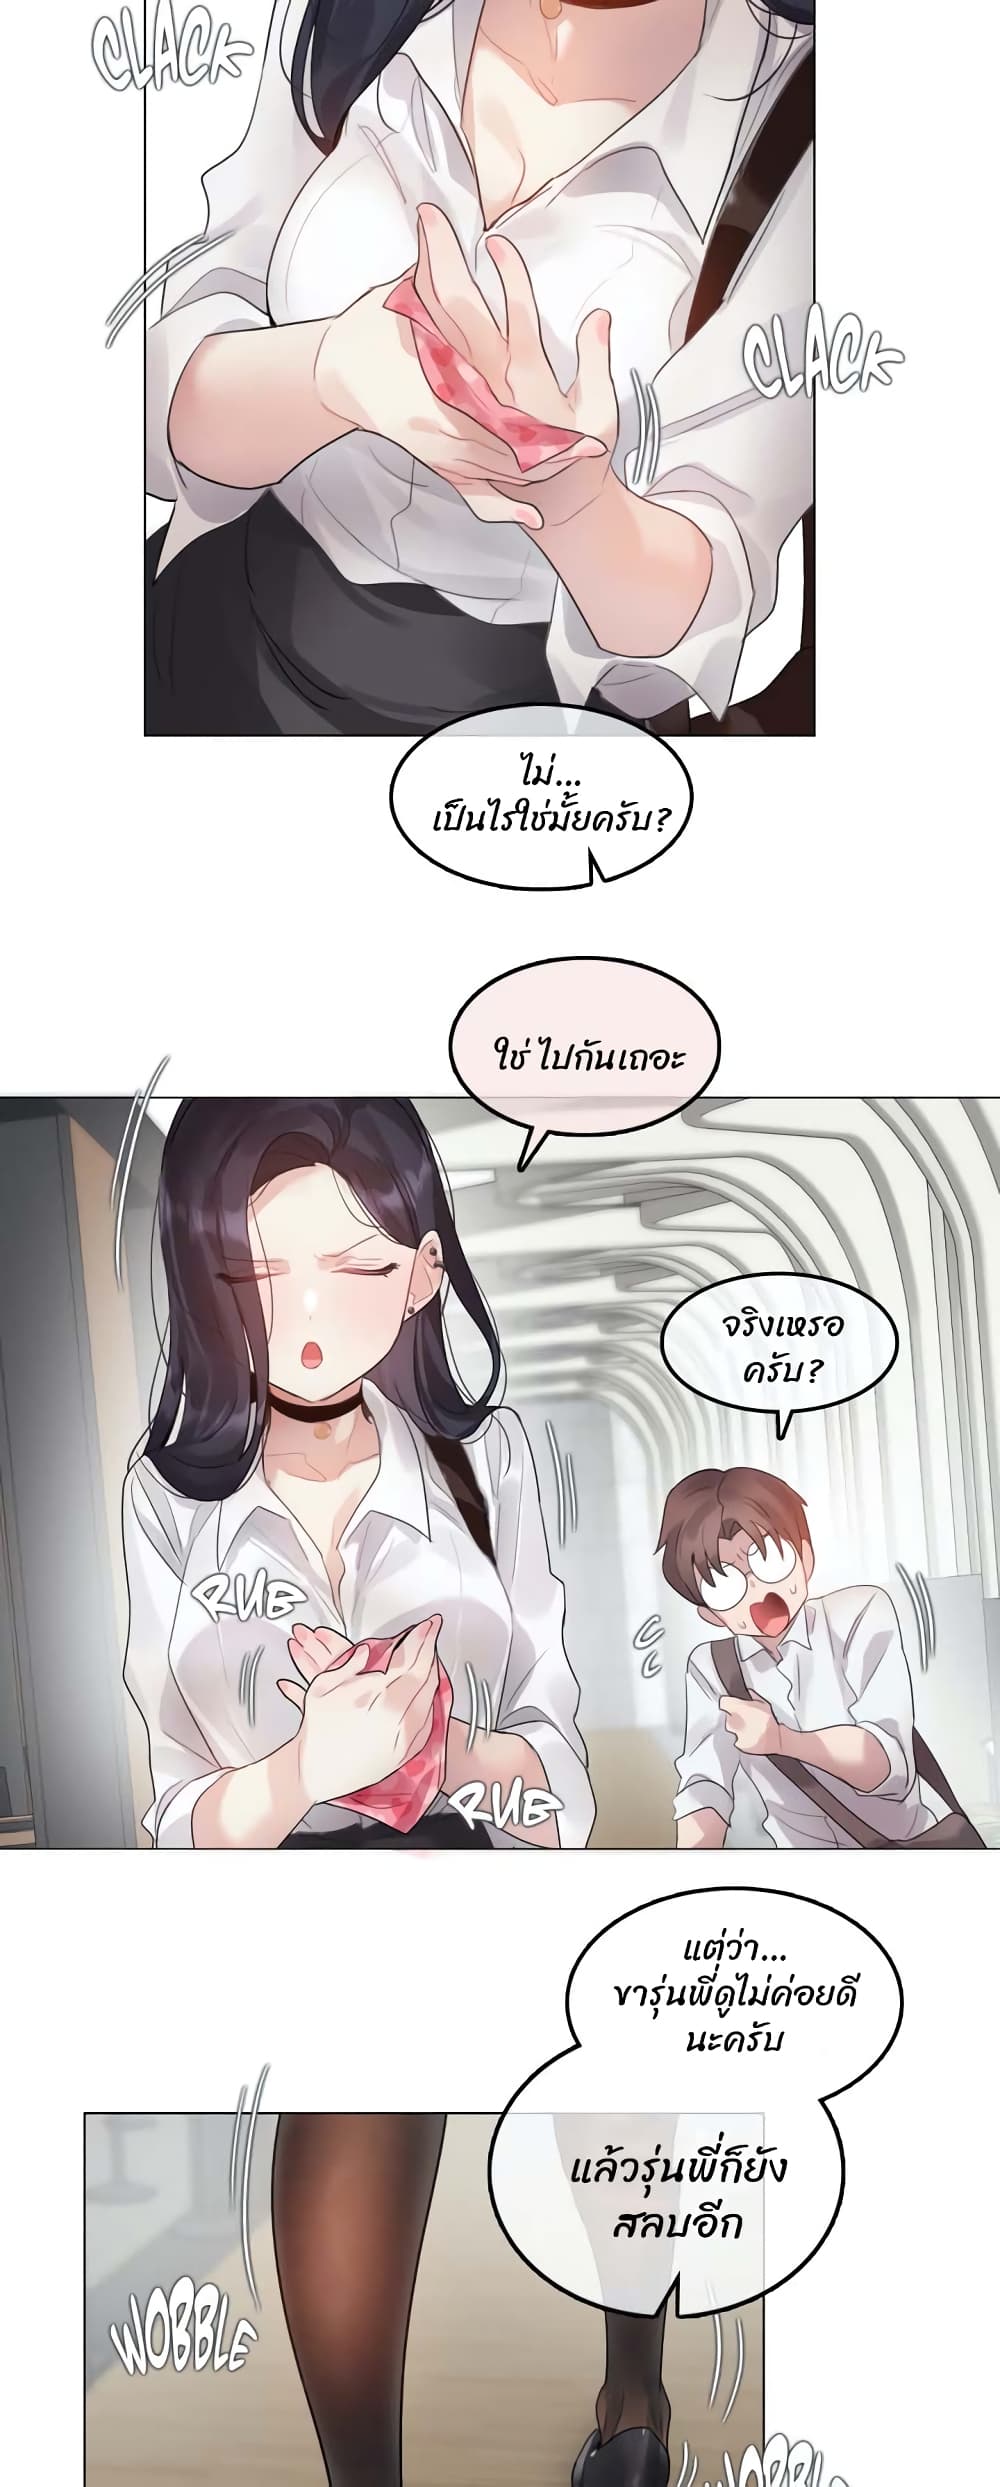 A Pervert's Daily Life 98 (23)